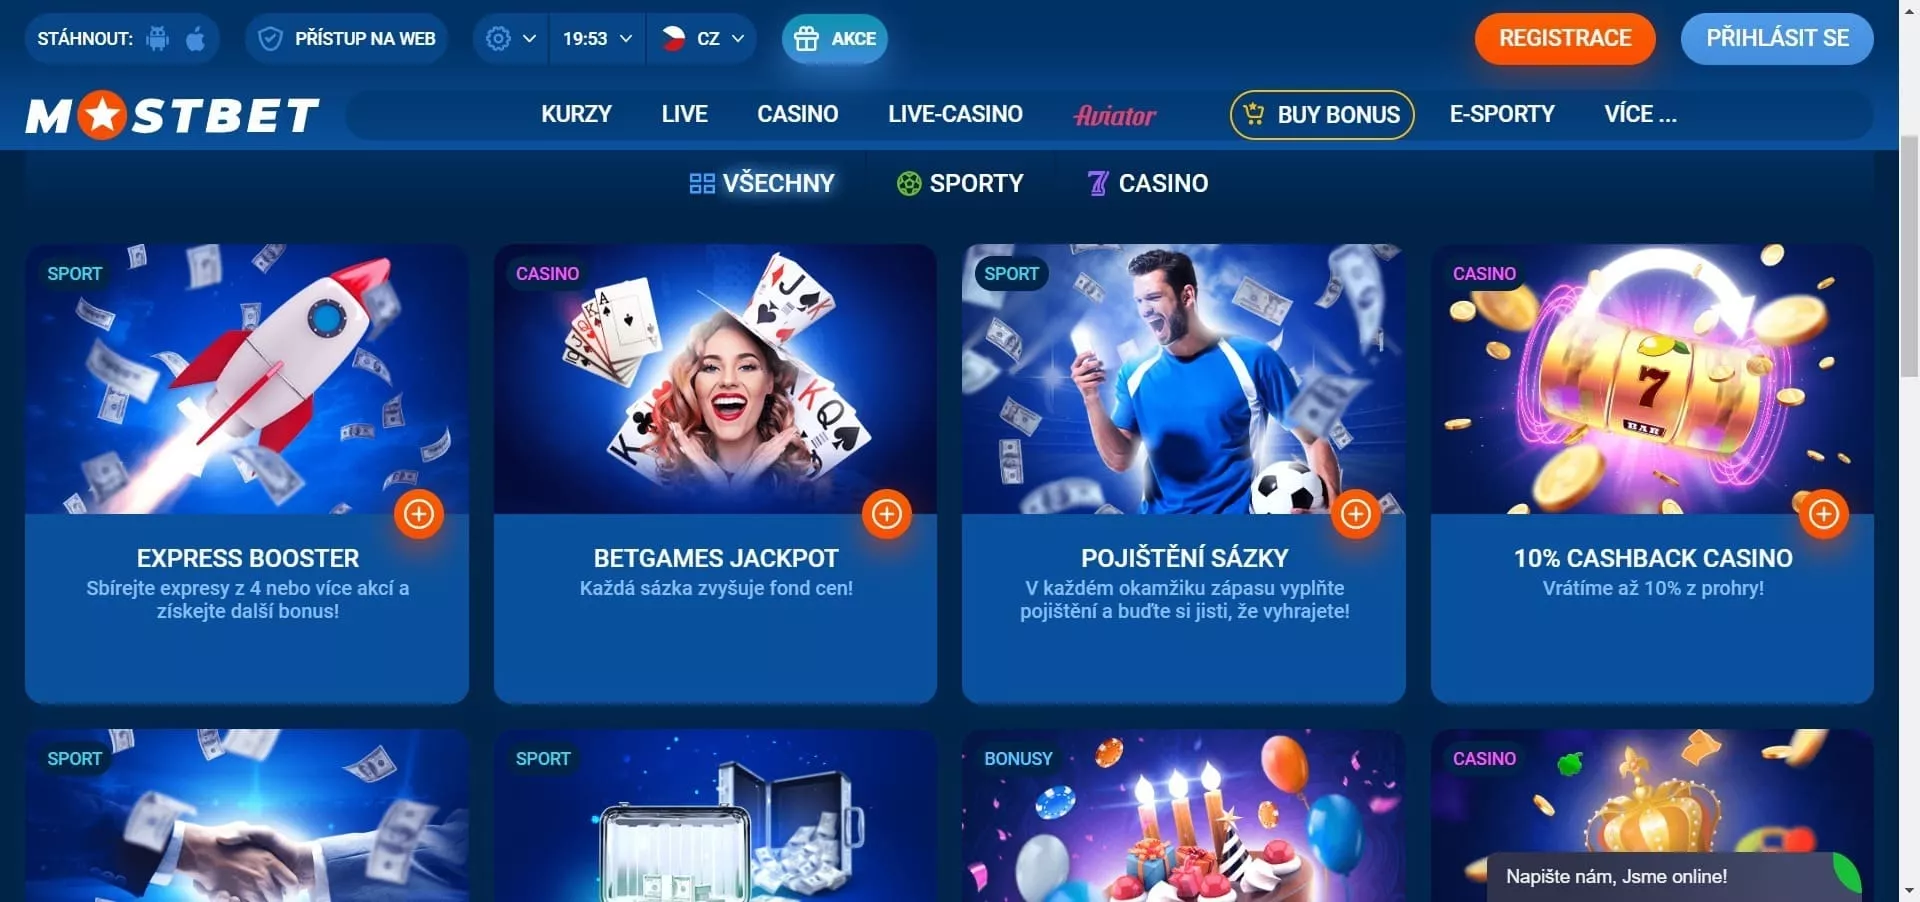 How To Win Buyers And Influence Sales with Mostbet-AZ91 bookmaker and casino in Azerbaijan